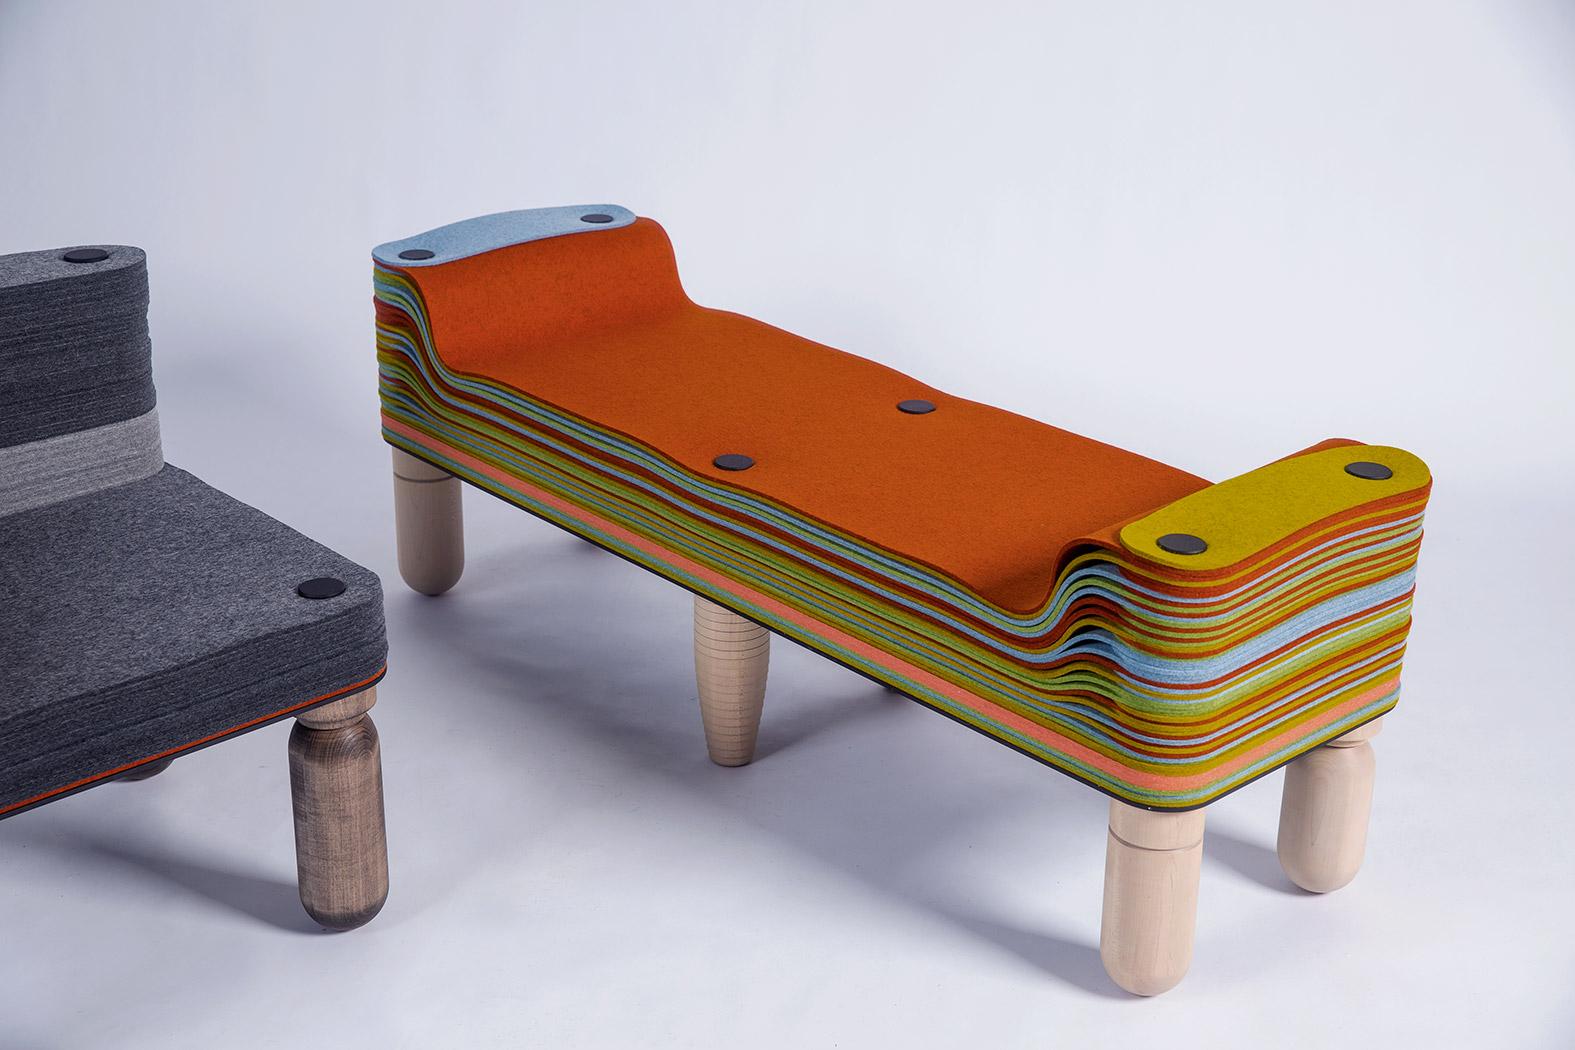 Canadian Maxine, Felt and Wood Bench, Benoist F. Drut in Stackabl, Canada, 2021 For Sale